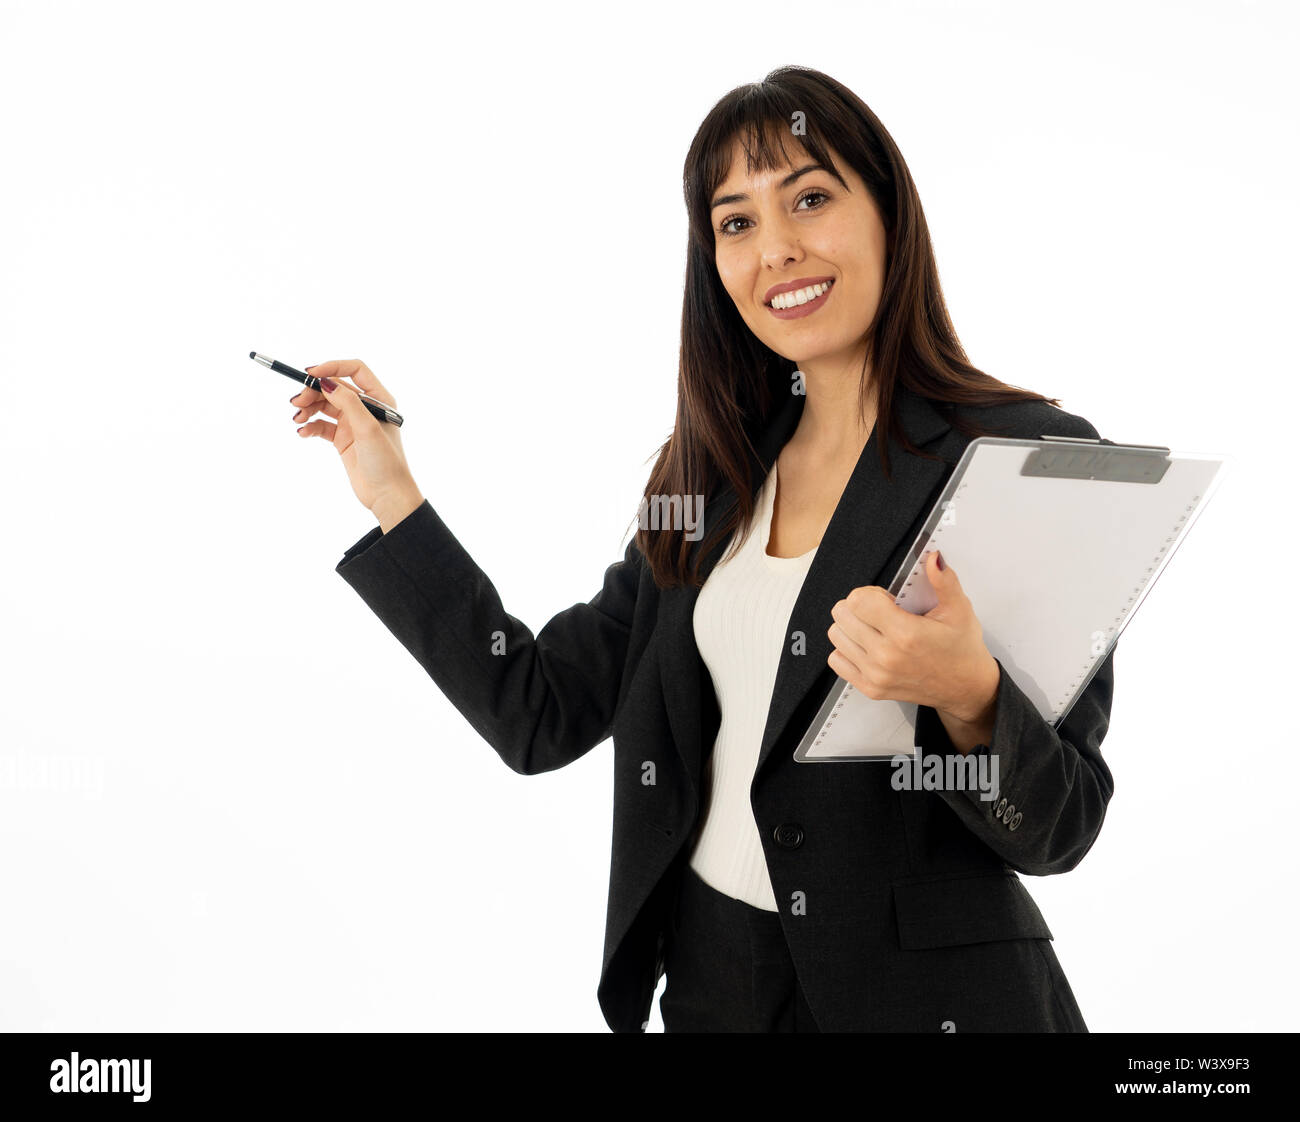 Close up of young pretty business woman standing pointing and holding a folder. Smiling feeling confident and successful. In people business education Stock Photo